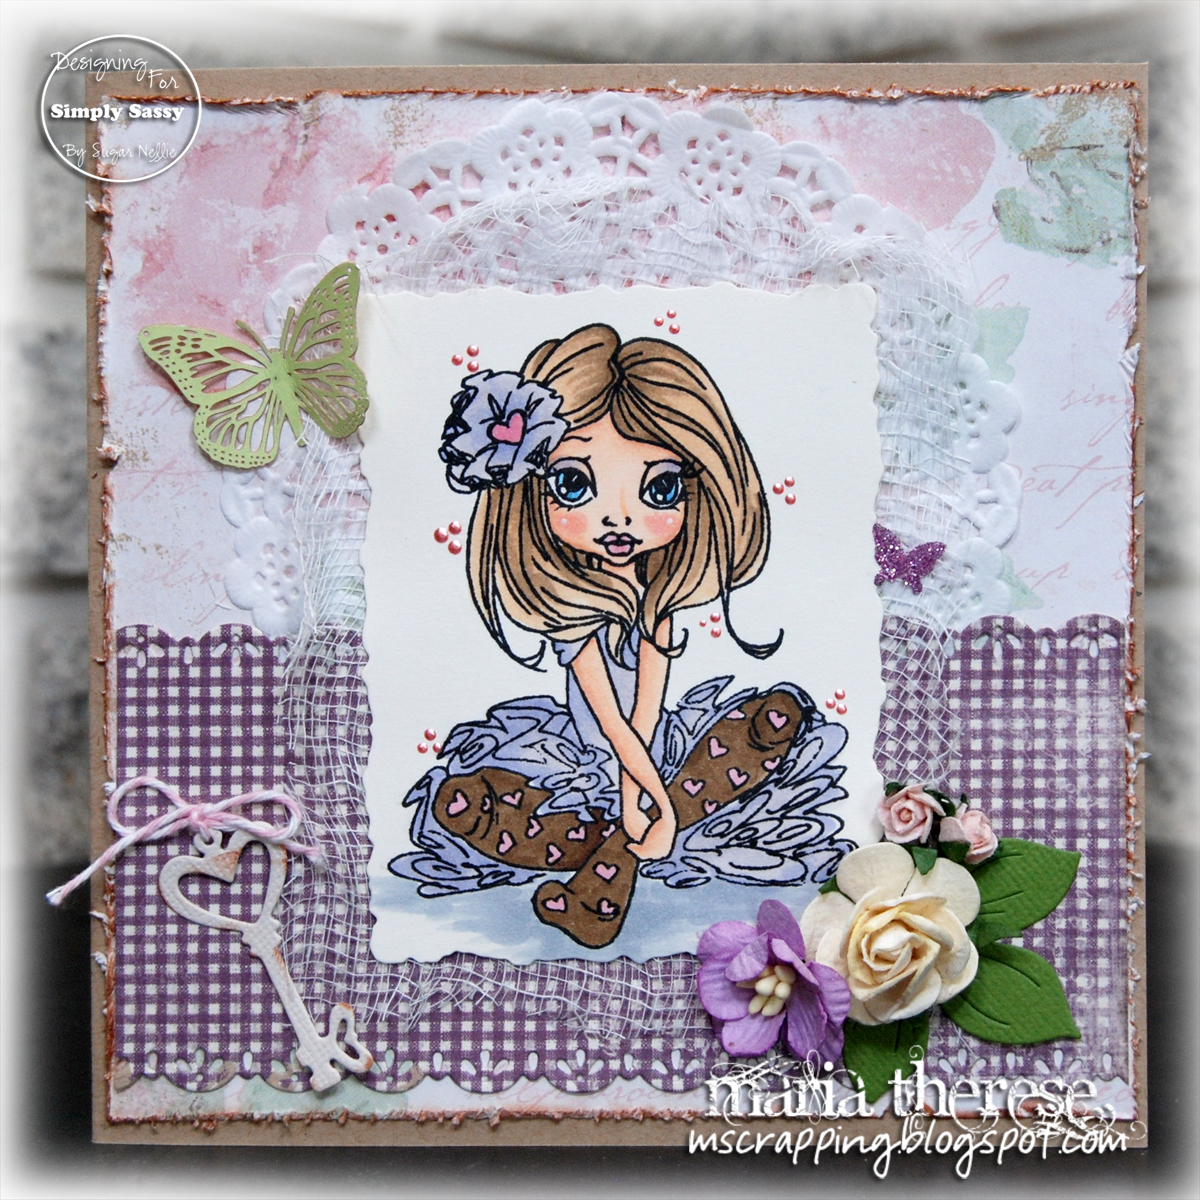 Me Myself And Scrapping Simply Sassy Set 10 Release Blog Hop